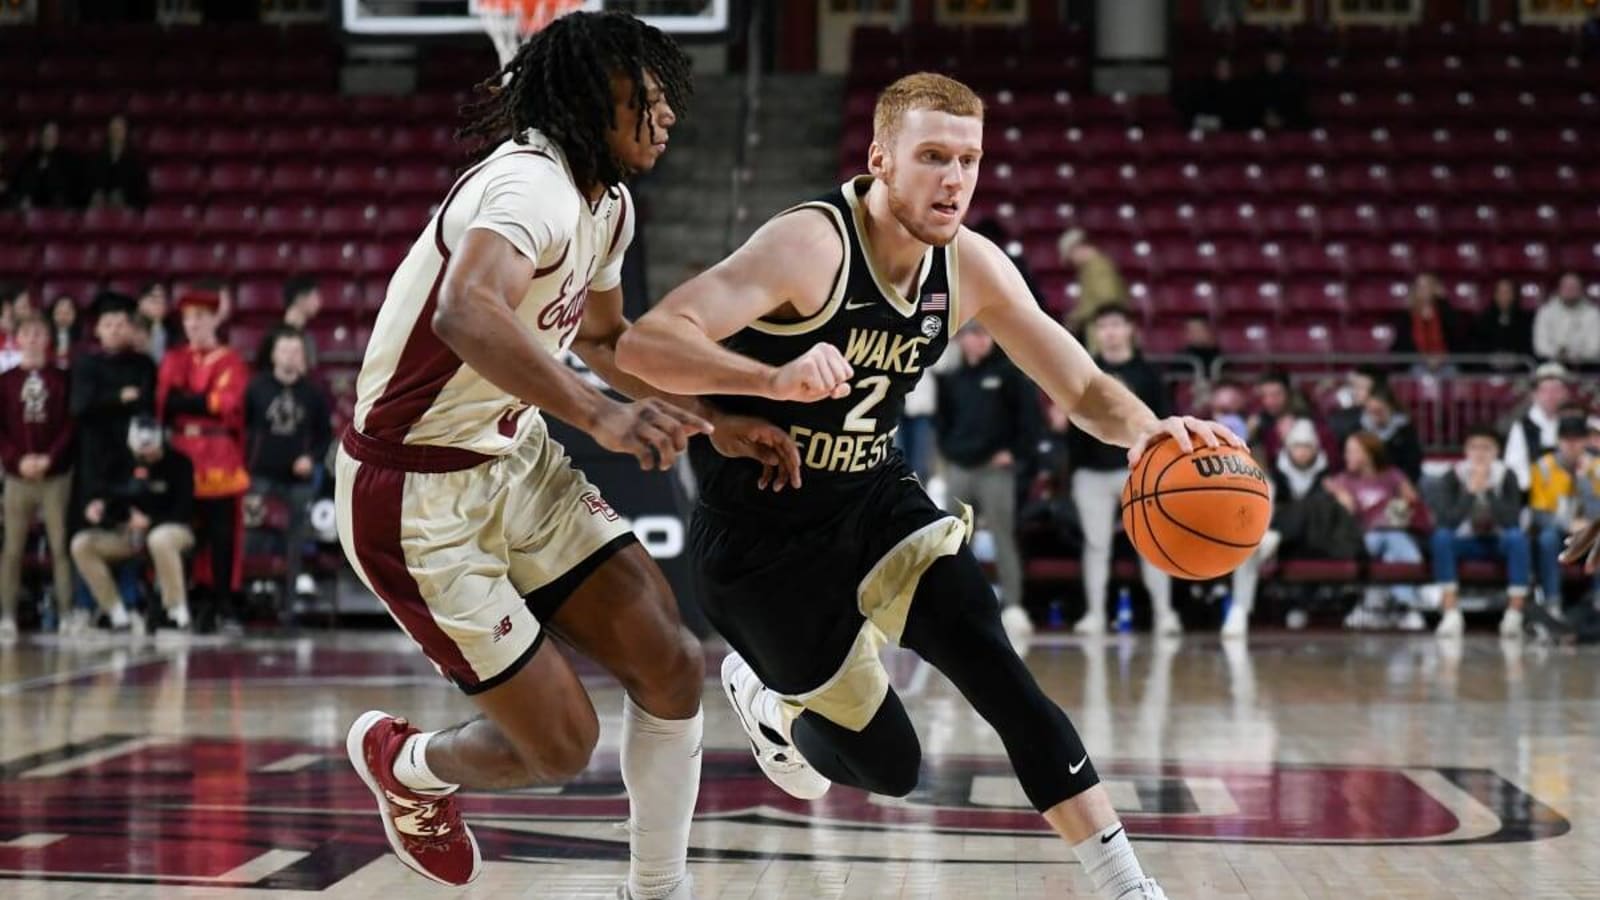 Wake Forest coasts to dominant road win over Boston College